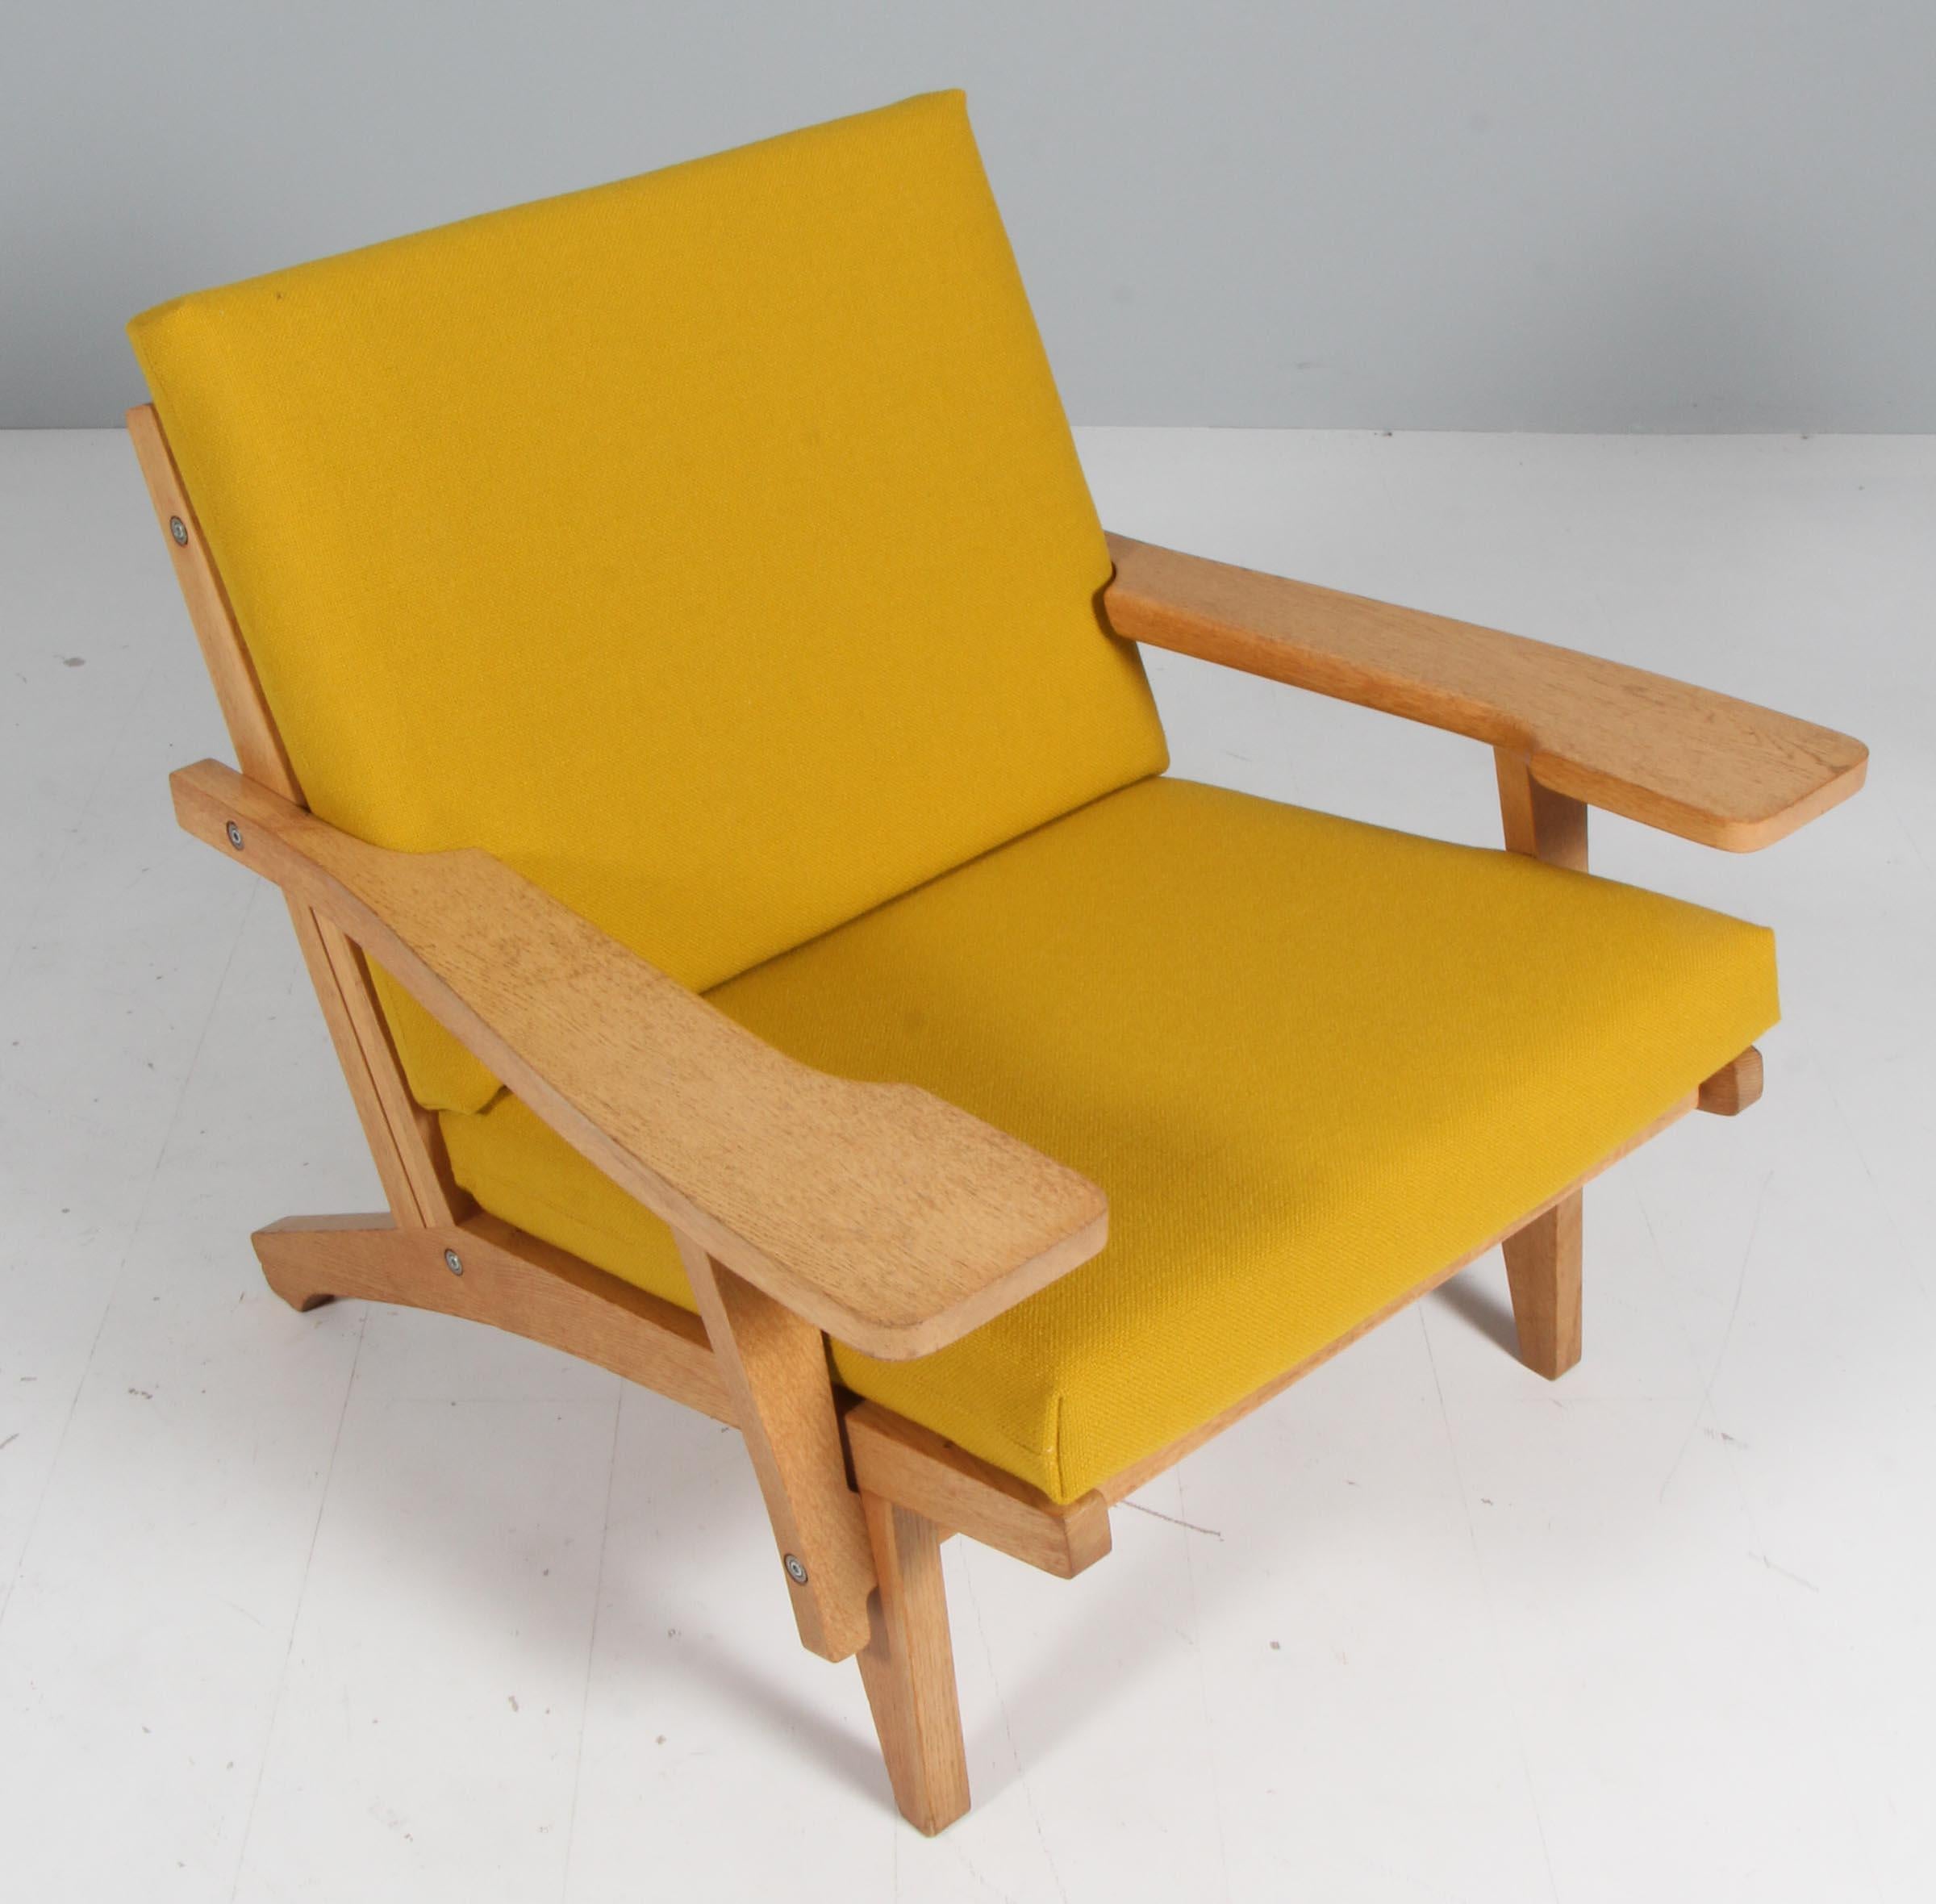 Hans J. Wegner lounge chair with loose cushions new upholstered with Hallingdal wool from Kvadrat

Frame of oak. With armrests.

Model GE-370, made by GETAMA.